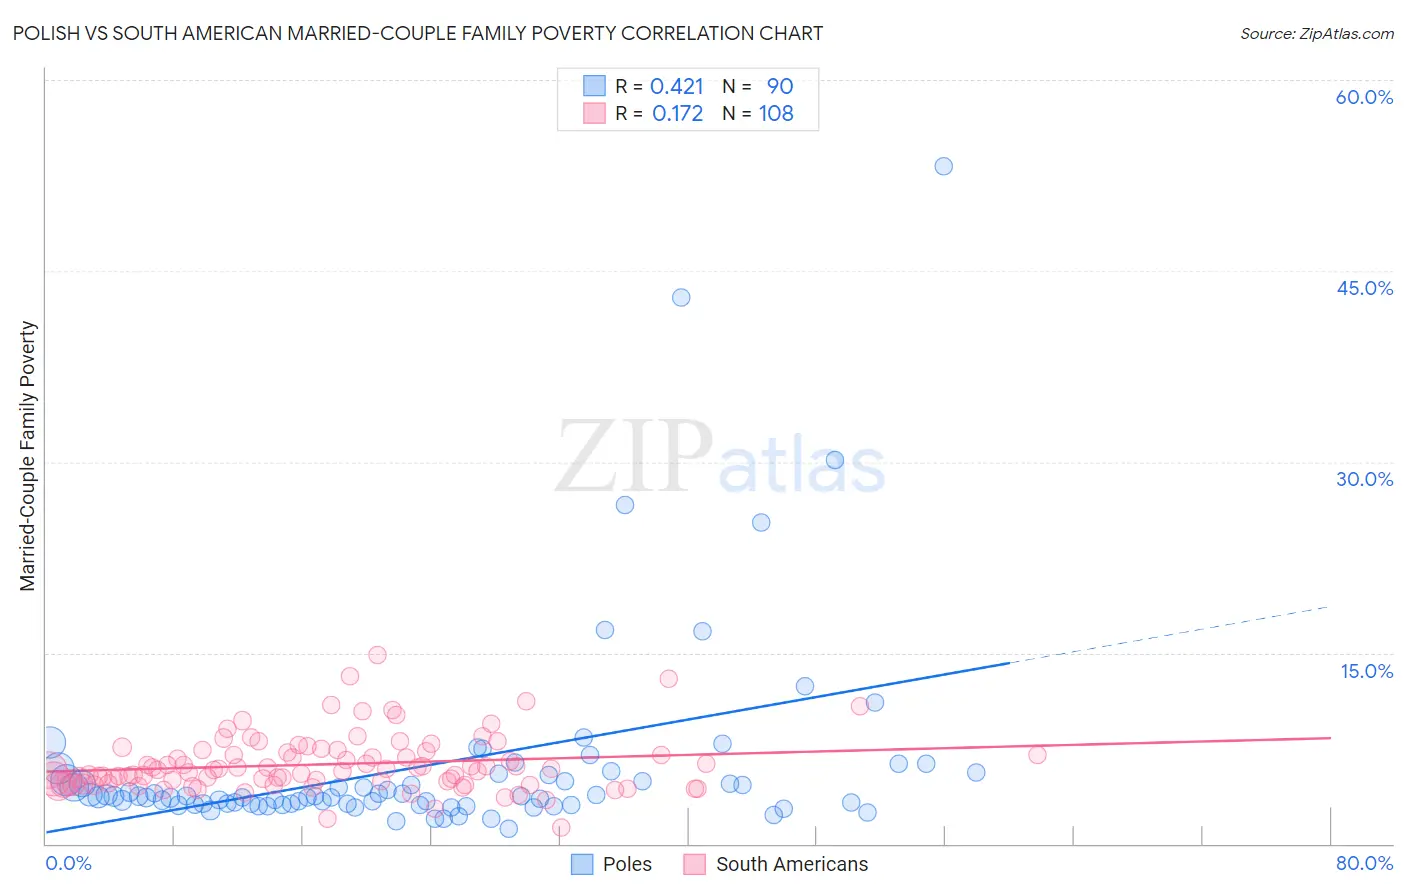 Polish vs South American Married-Couple Family Poverty